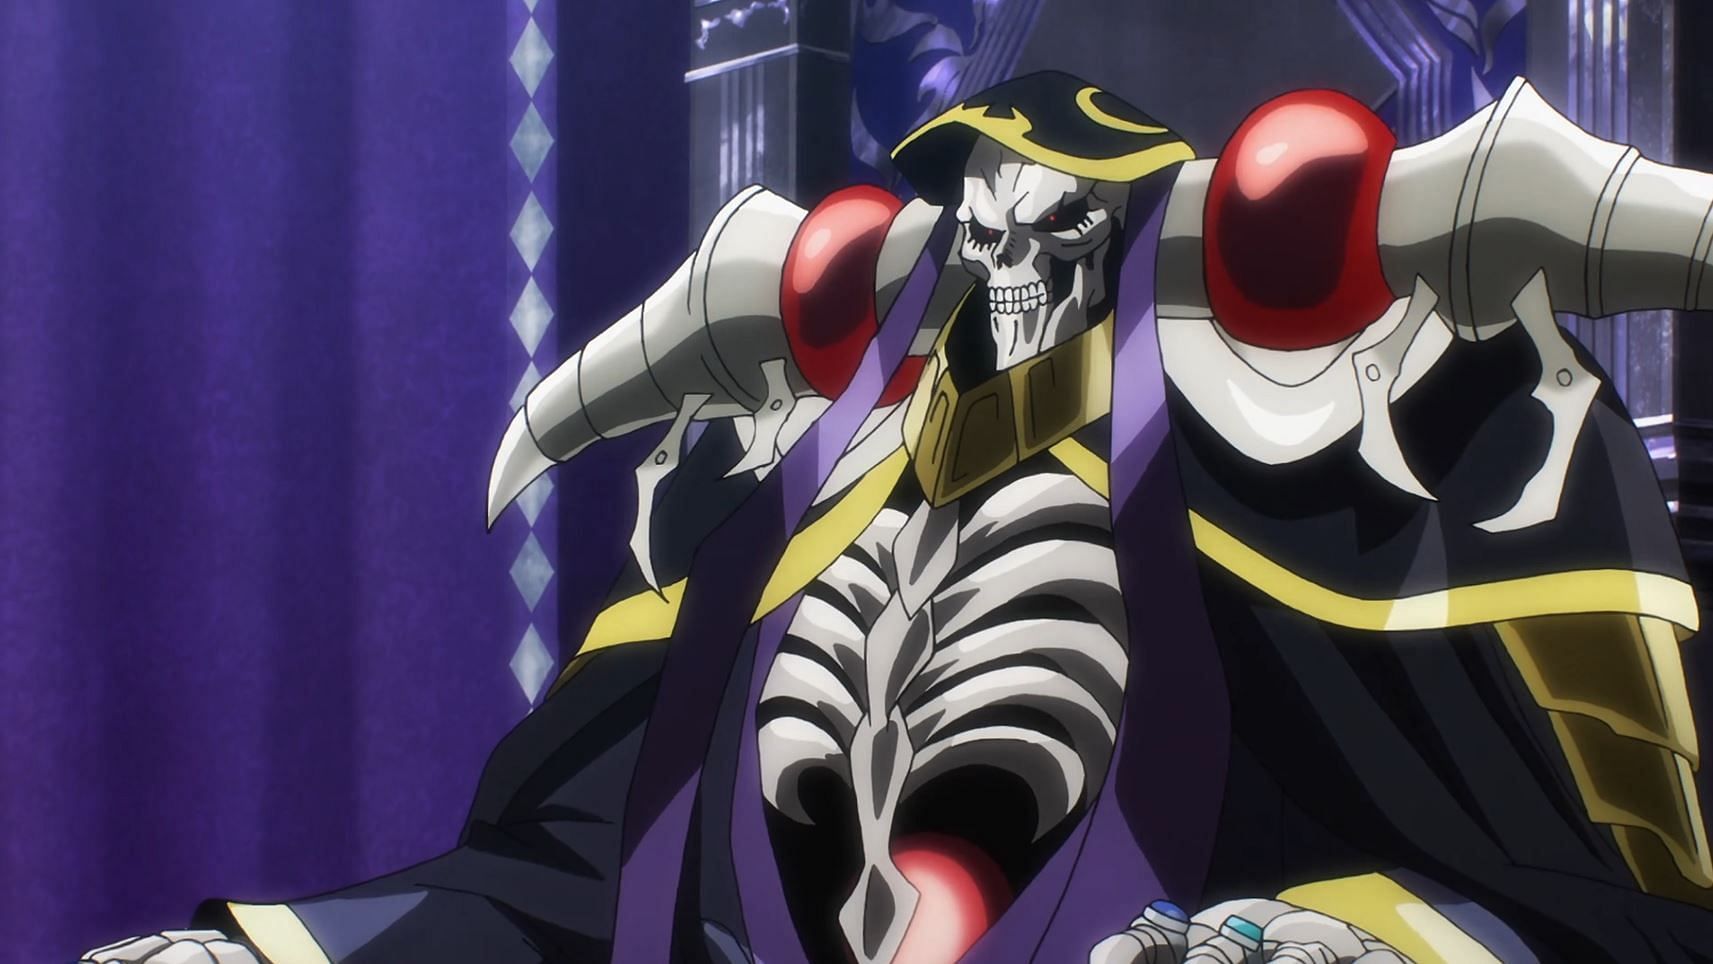 Ainz Ooal Gown from Overlord IV (Image via Madhouse)